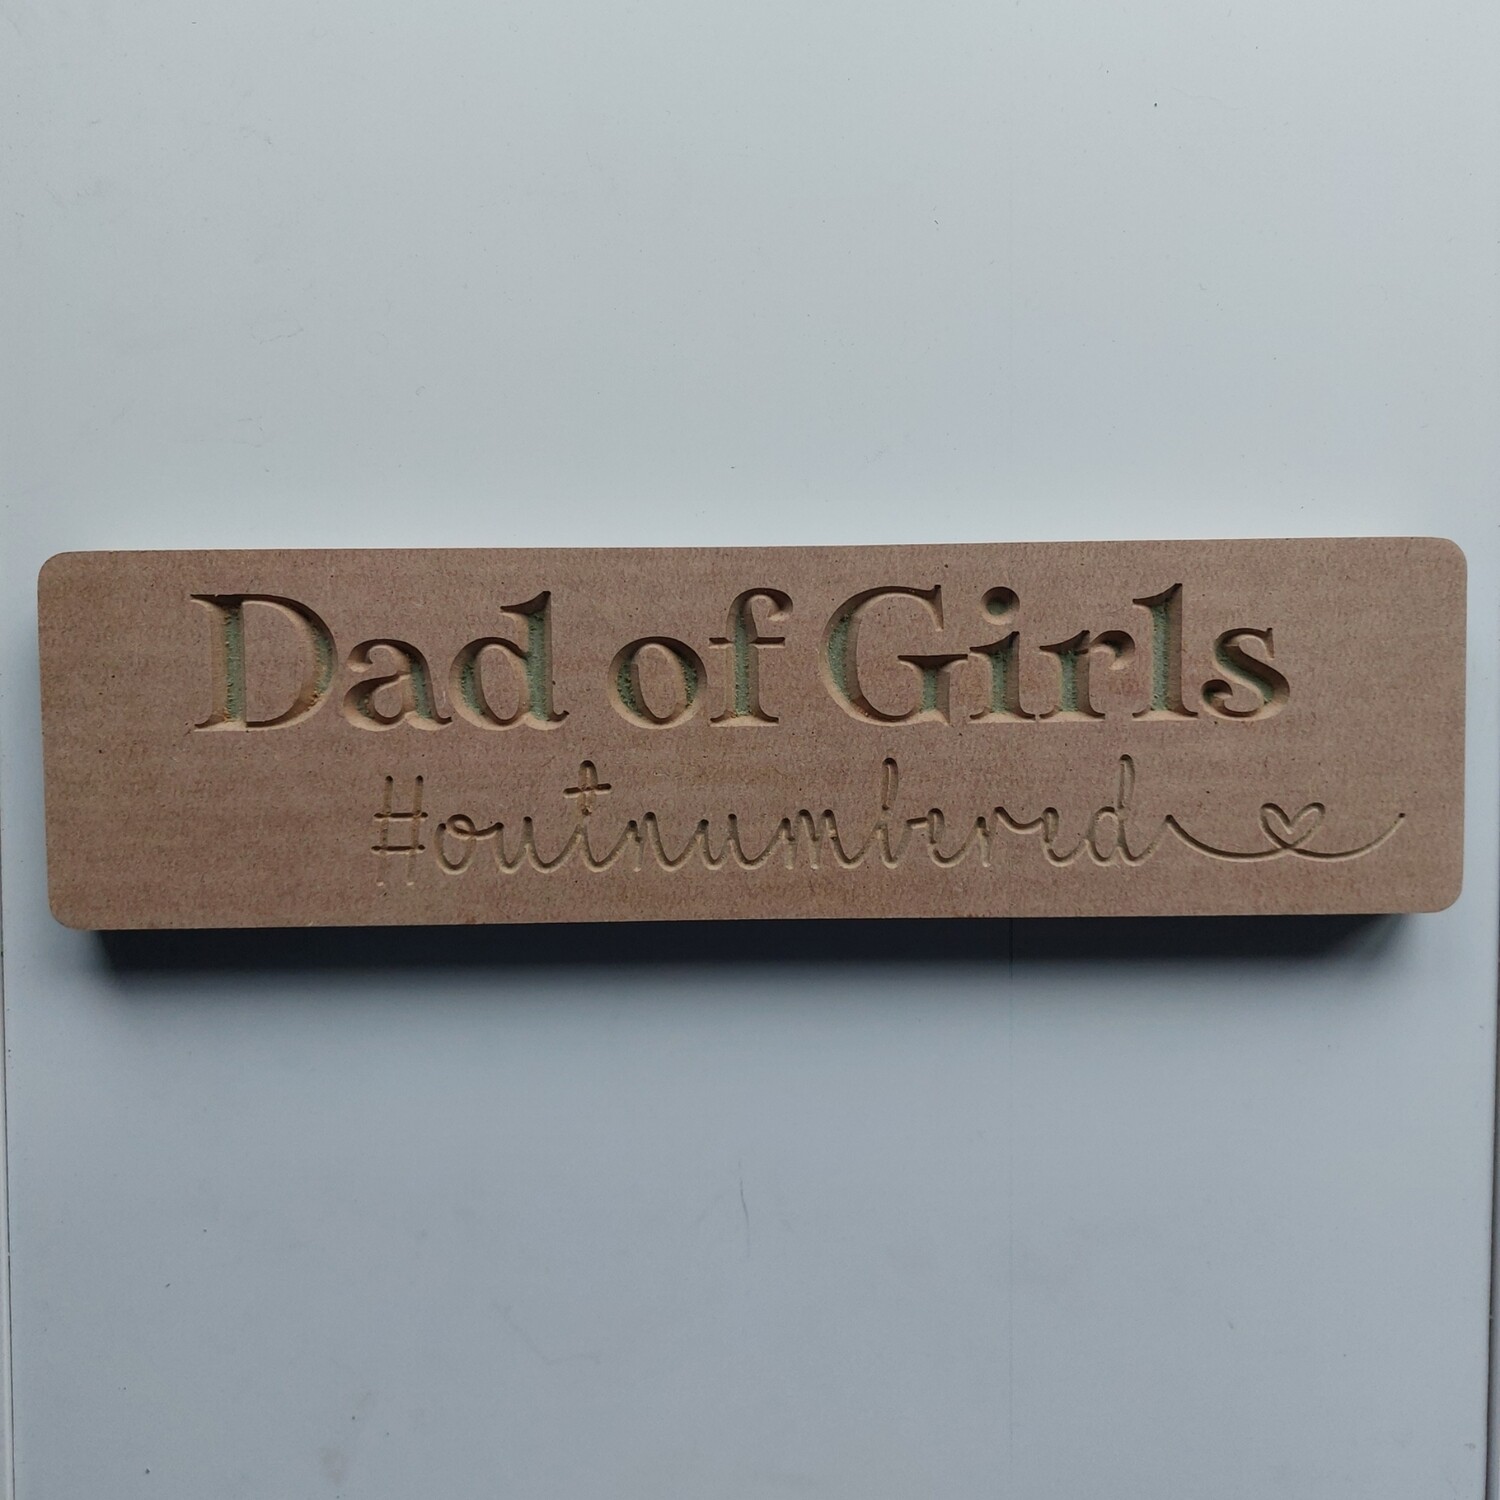 Dad of Girls #outnumbered 18mm